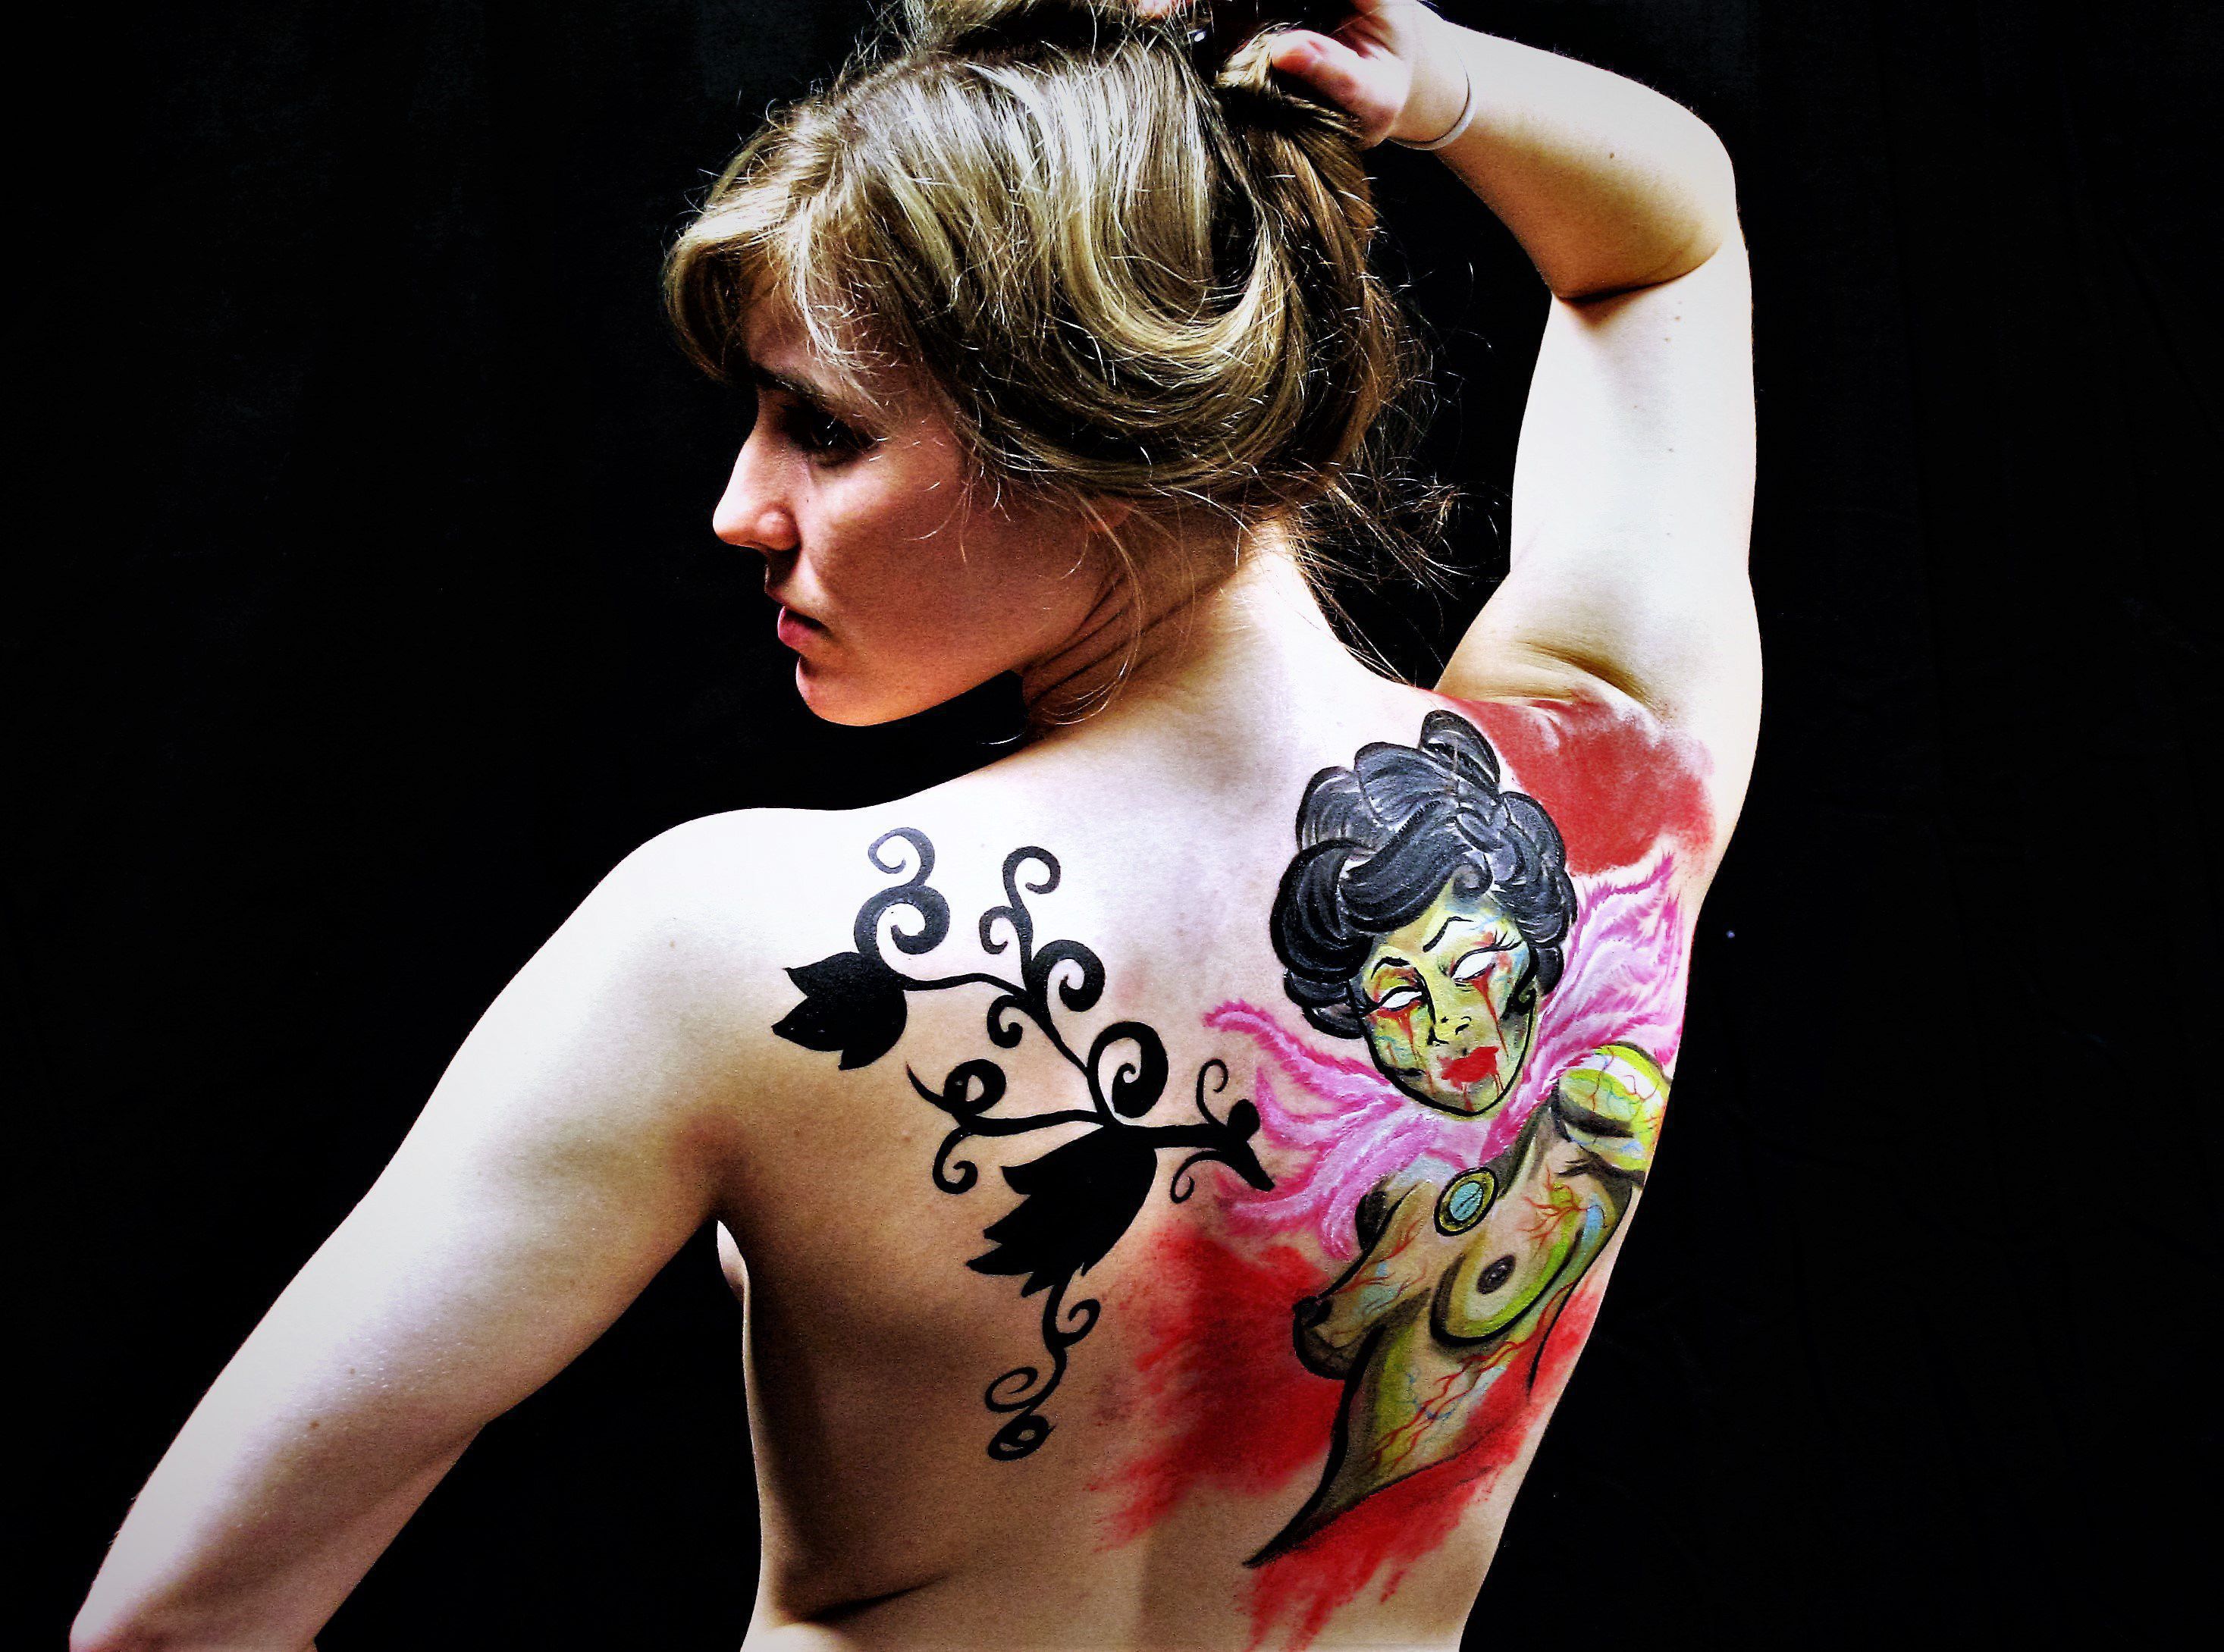 body paint wallpaper,tattoo,shoulder,arm,joint,temporary tattoo